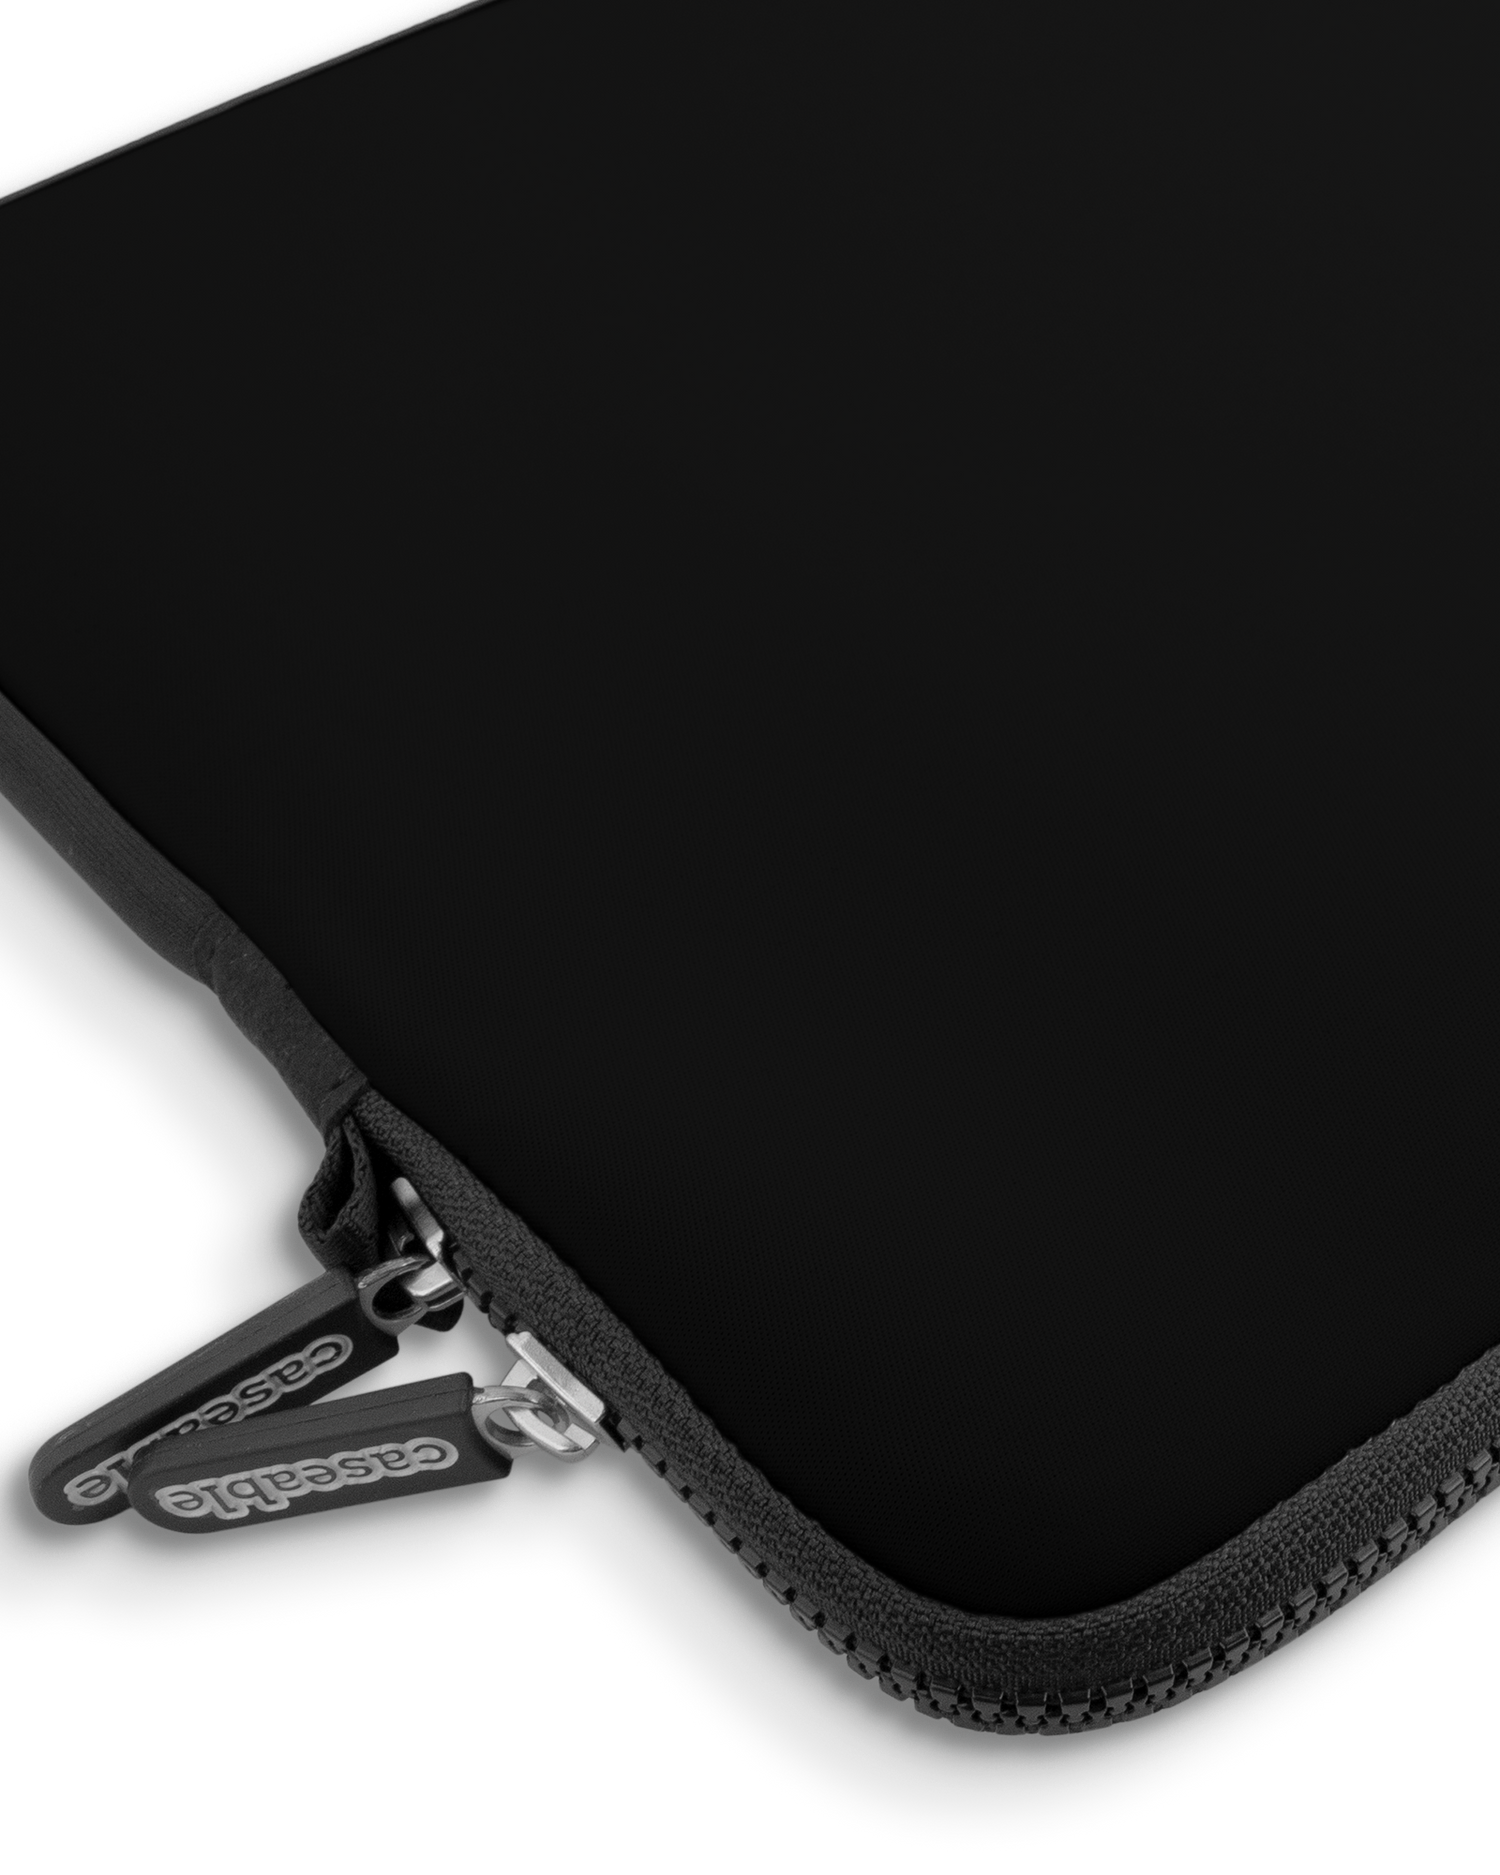 BLACK Premium Laptop Bag 15 inch with device inside